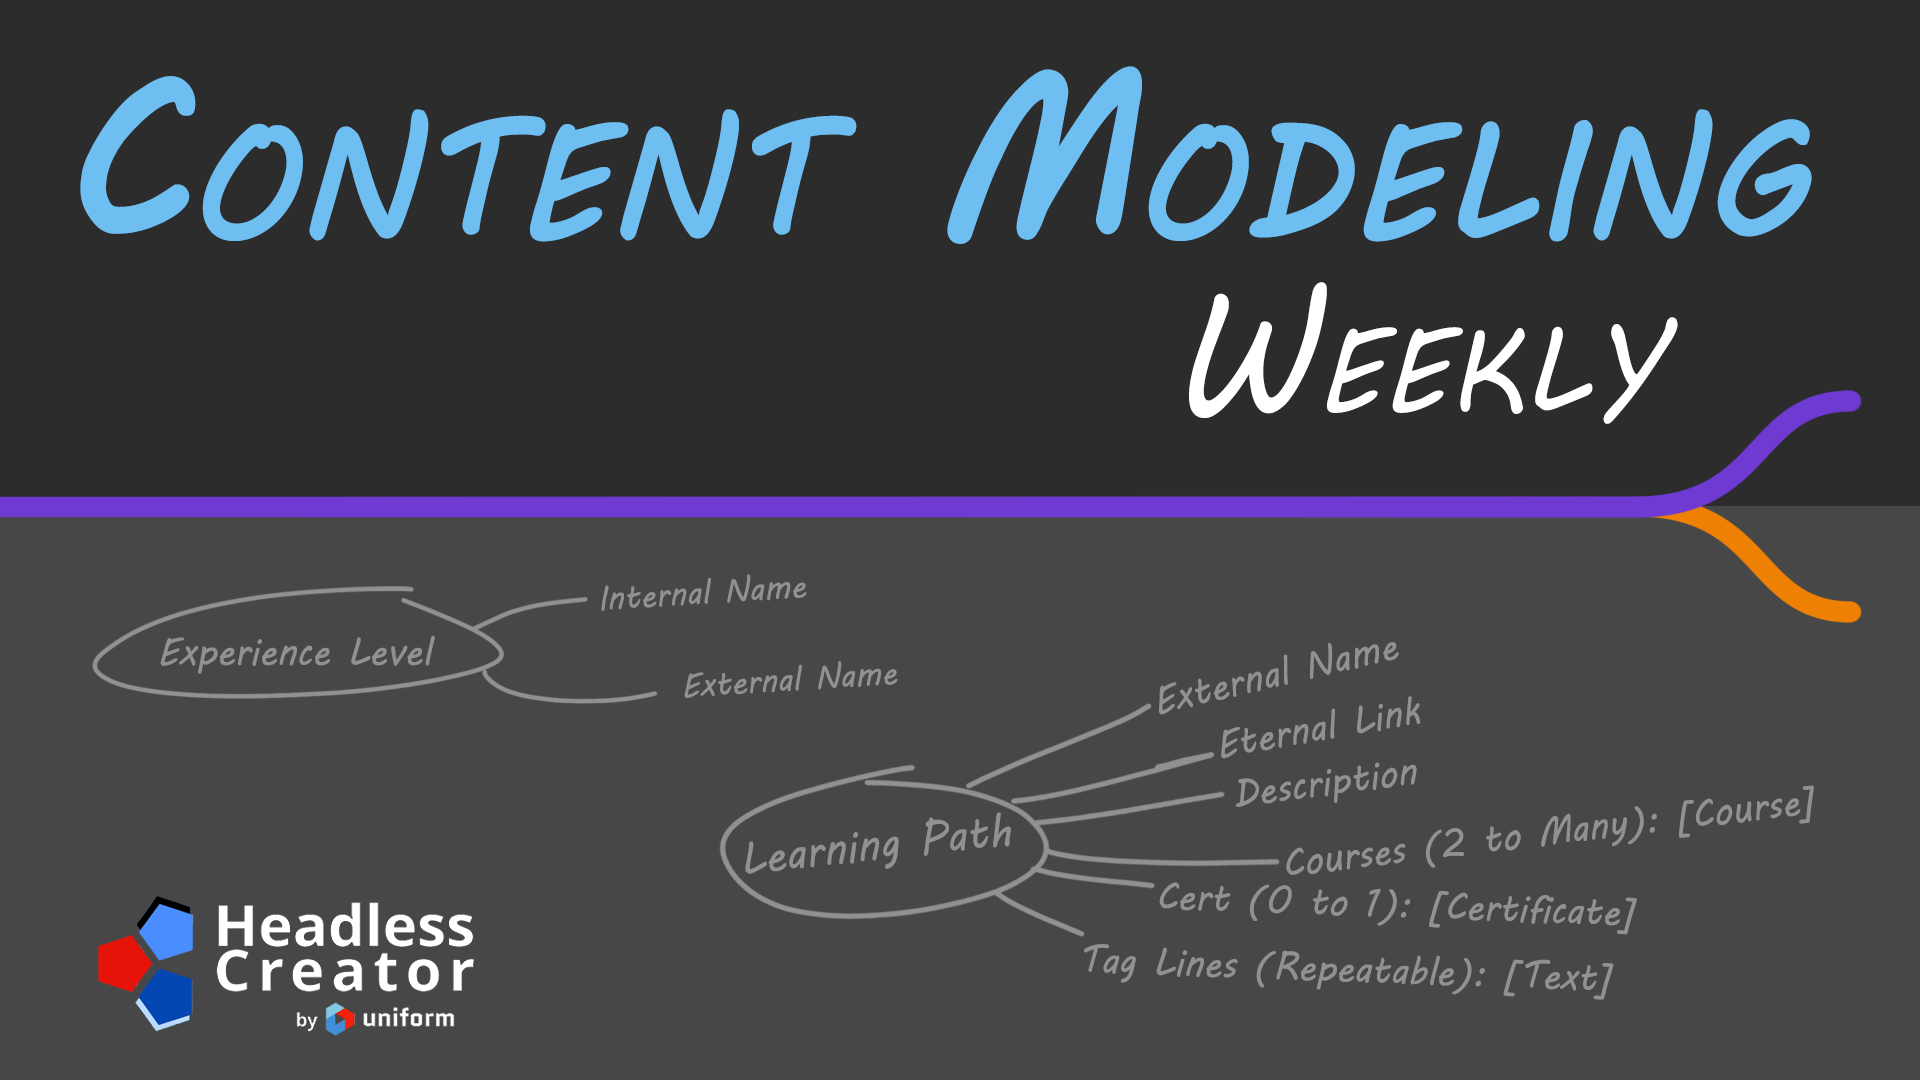 Content Modeling Weekly